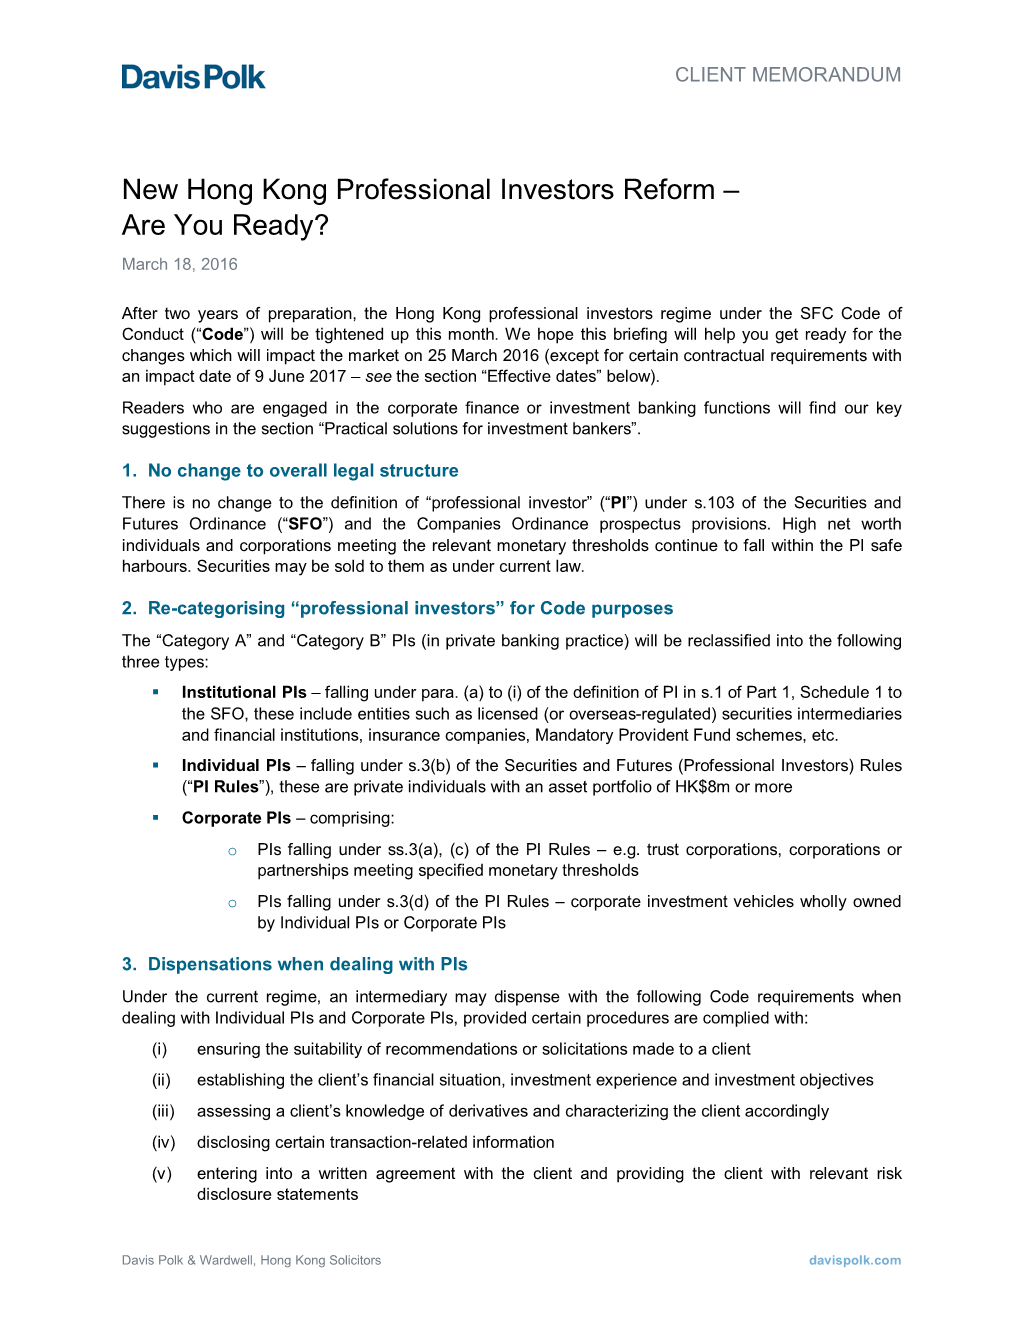 New Hong Kong Professional Investors Reform – Are You Ready? March 18, 2016